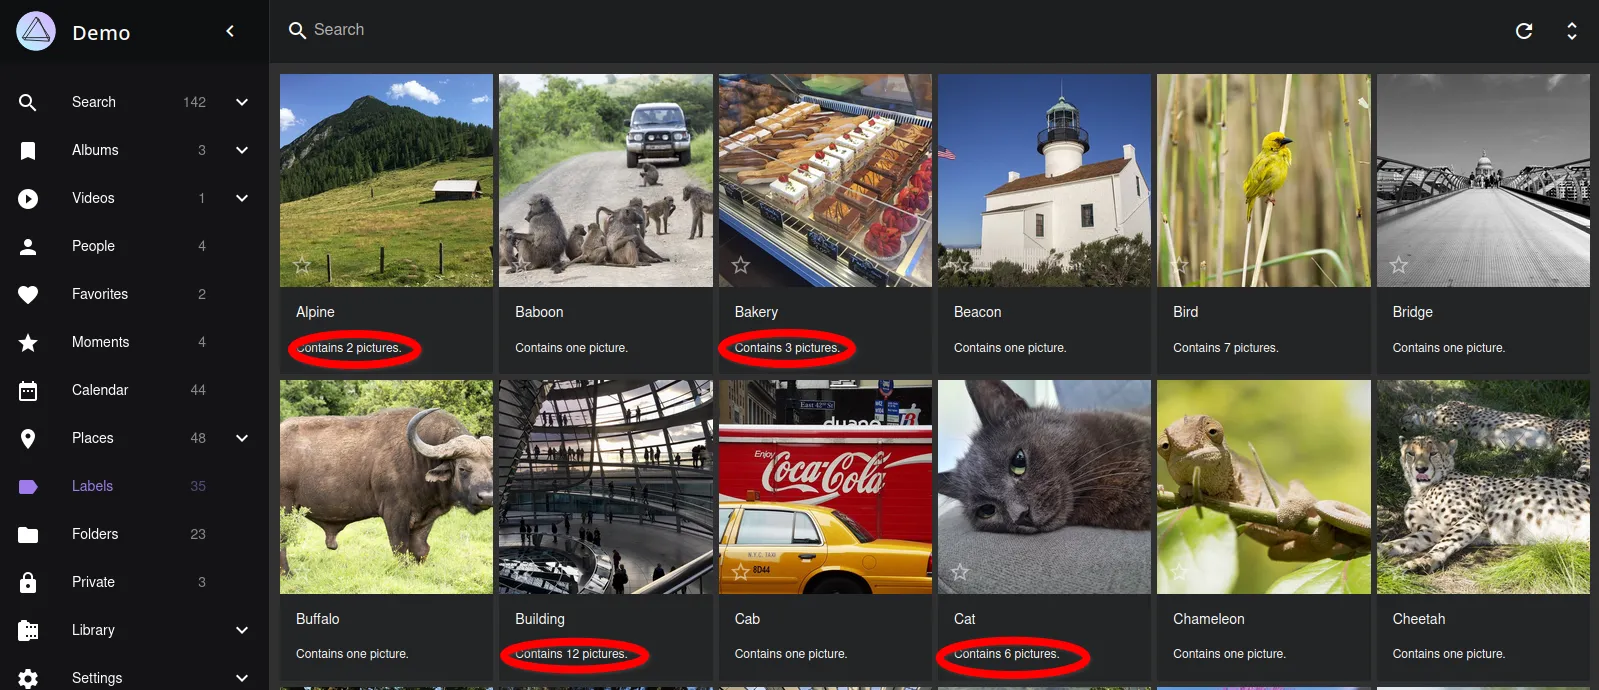 Implementation of the algorithm for sorting photos by tags in PhotoPrism